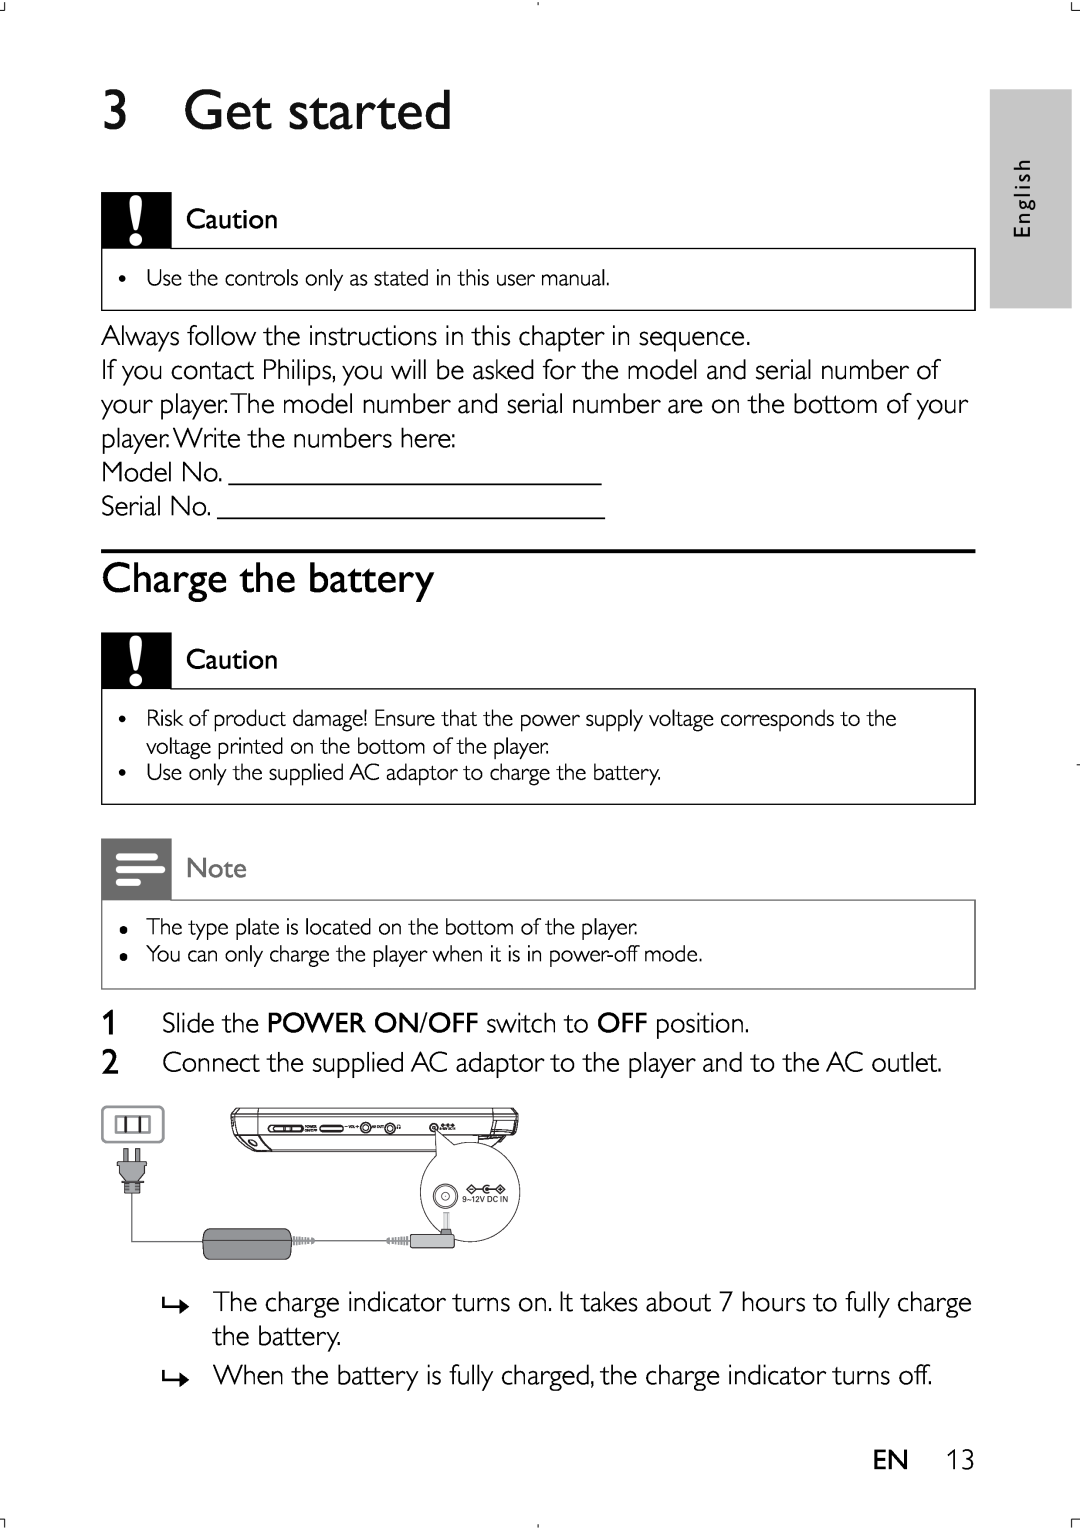 Philips PET941D user manual Get started, Charge the battery 